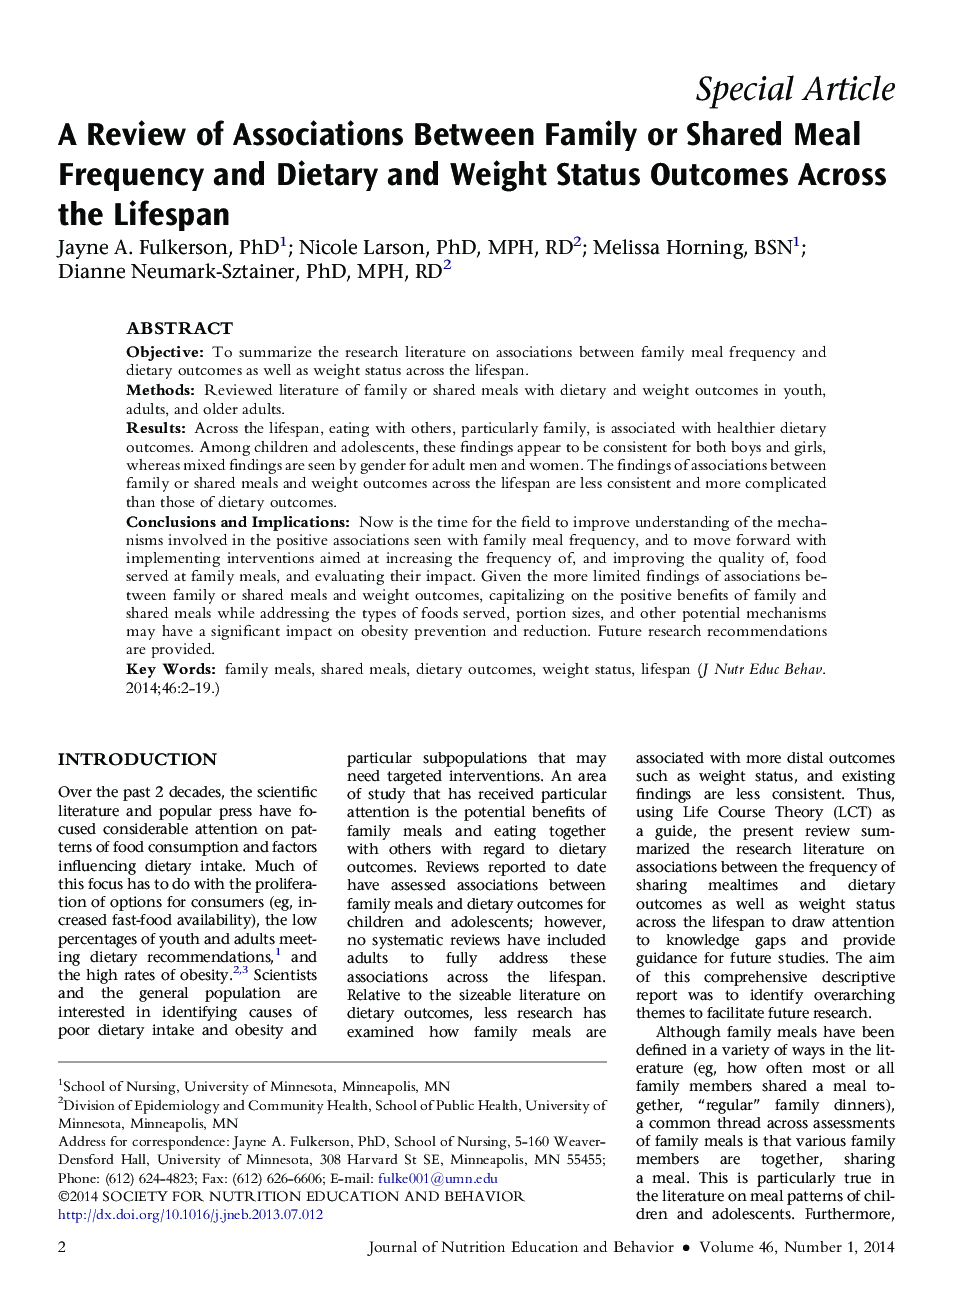 A Review of Associations Between Family or Shared Meal Frequency and Dietary and Weight Status Outcomes Across the Lifespan